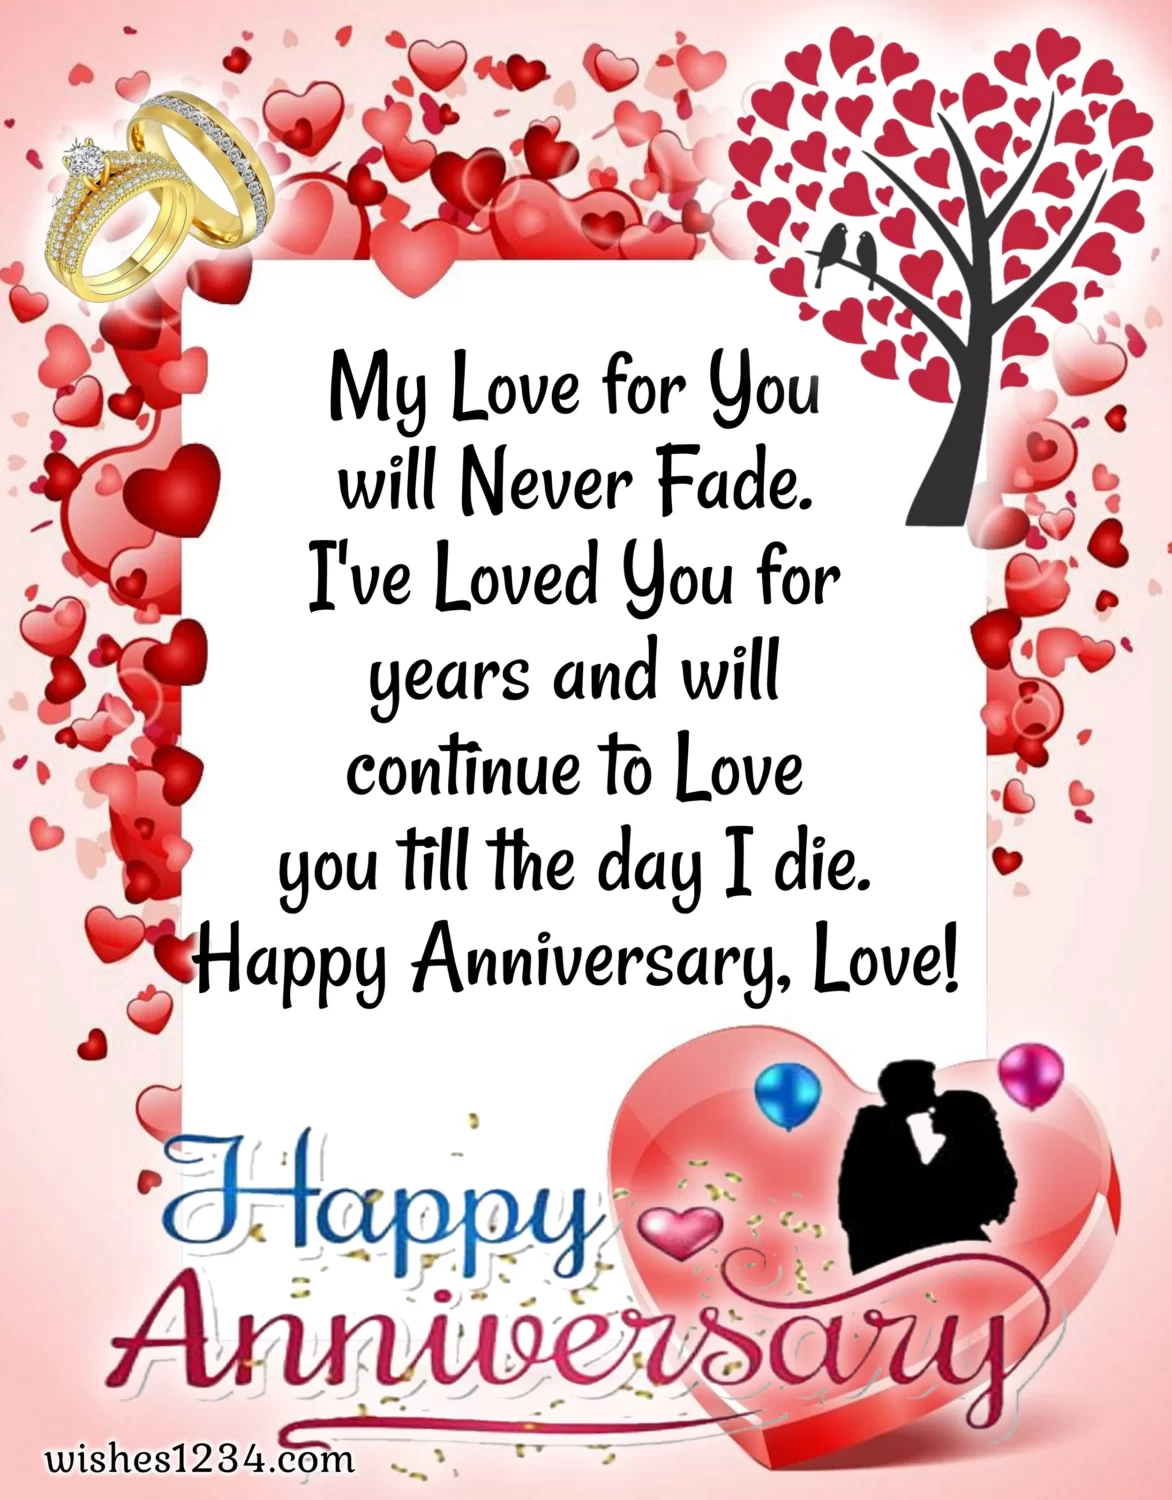 Happy anniversary wishes for wife with hearts background, Happy Anniversary Husband.